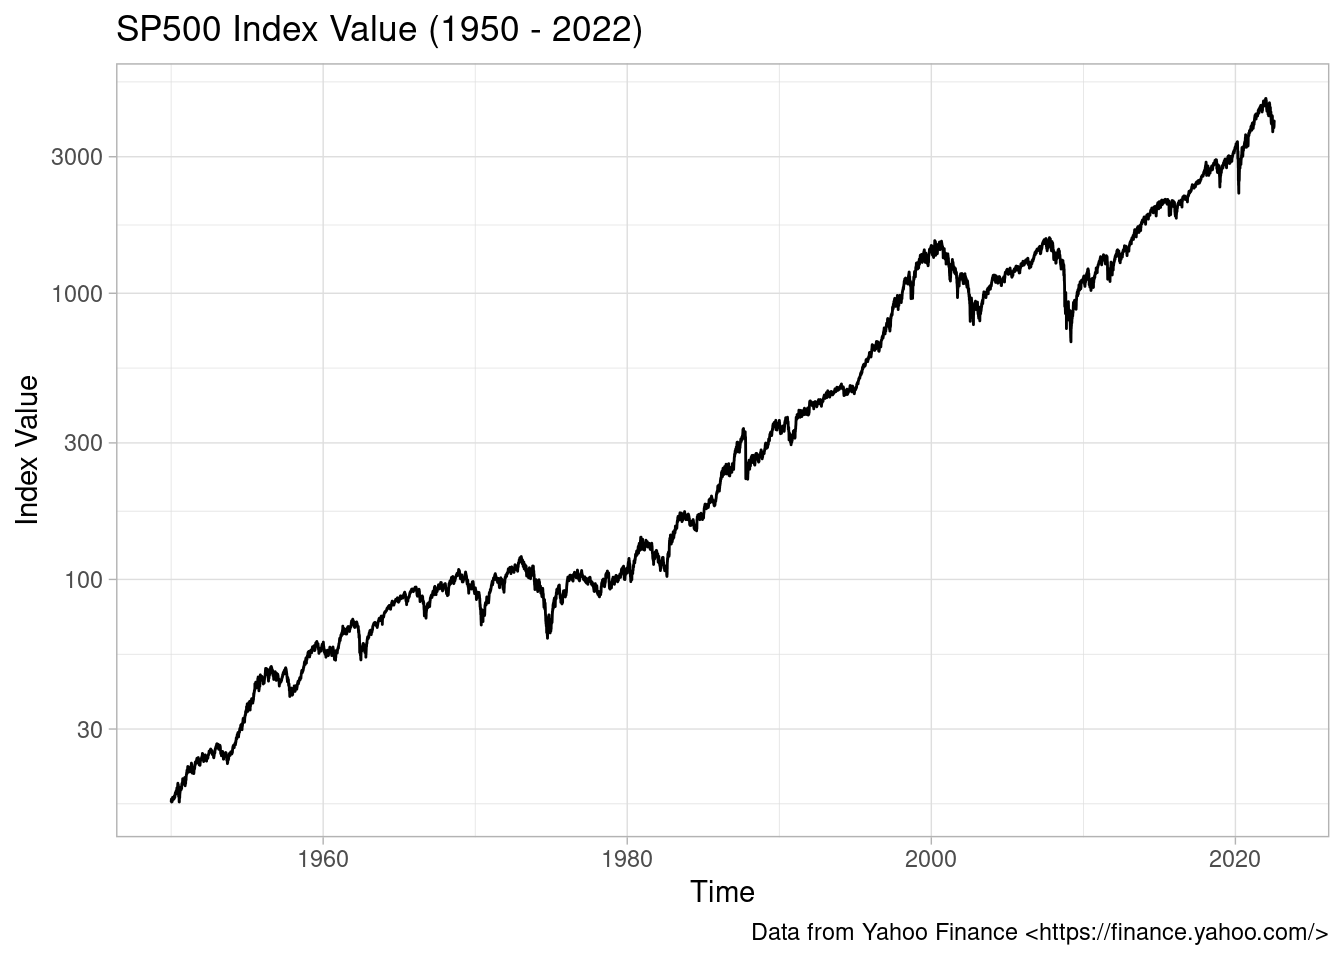 Black and white line graph showing the SP500 index value increasing over time.The x axis is time from 1950 to 2020 and the y axis is on a log scale and shows index values increasing from <30 to >3000.